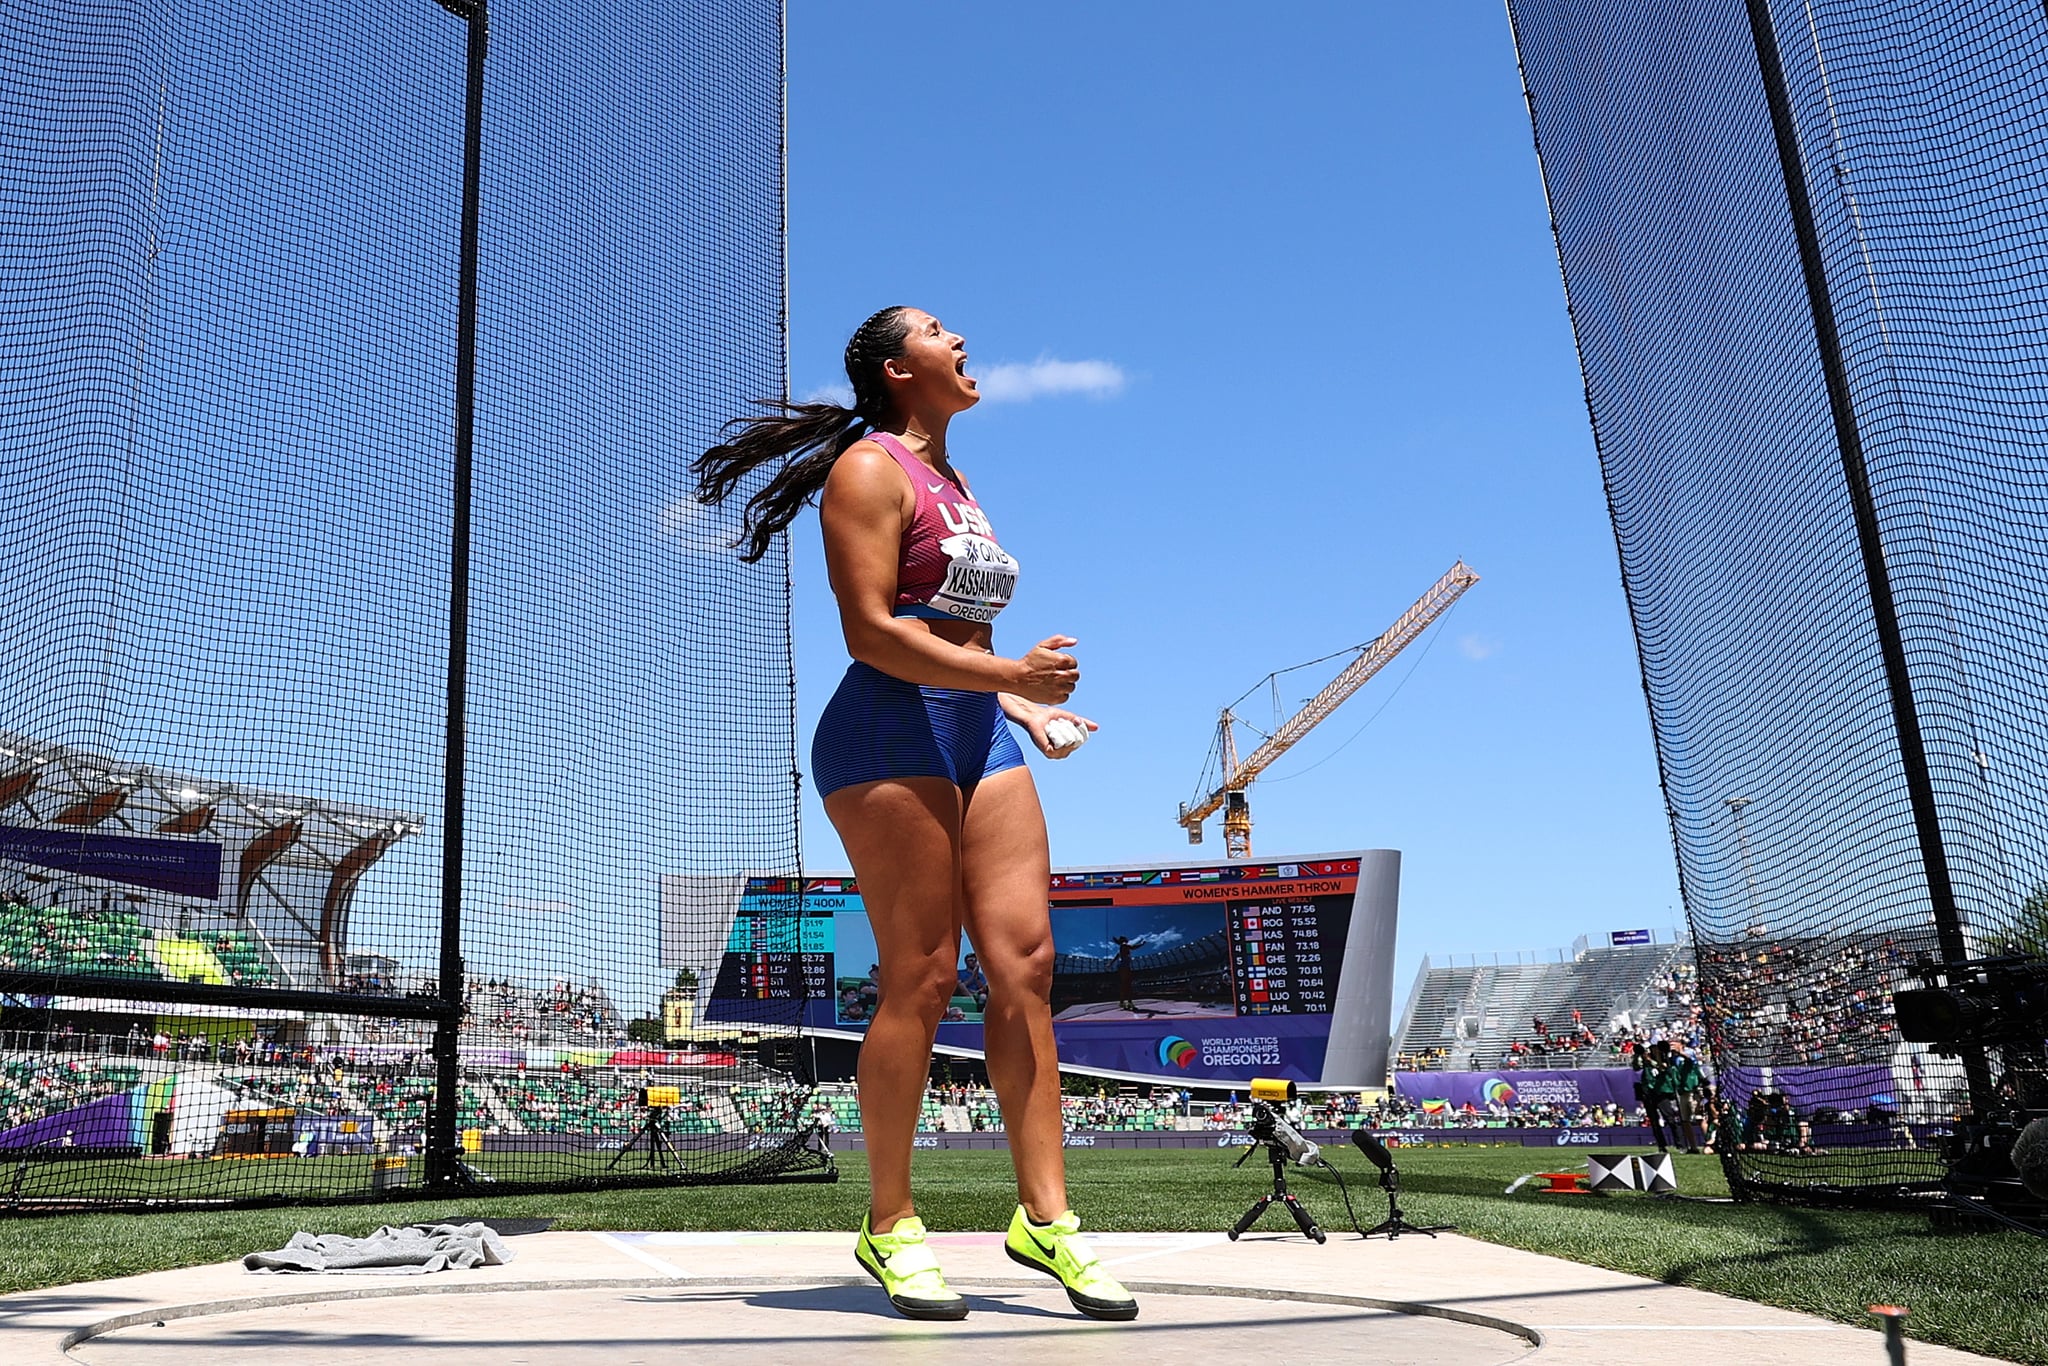 Janee' Kassanavoid of Team USA reacts while competing in the Women's Hammer Throw Final at the World Athletics Championships Oregon22 at Hayward Field on July 17, 2022 in Eugene, Oregon. (Photo by Christian Petersen/Getty Images)